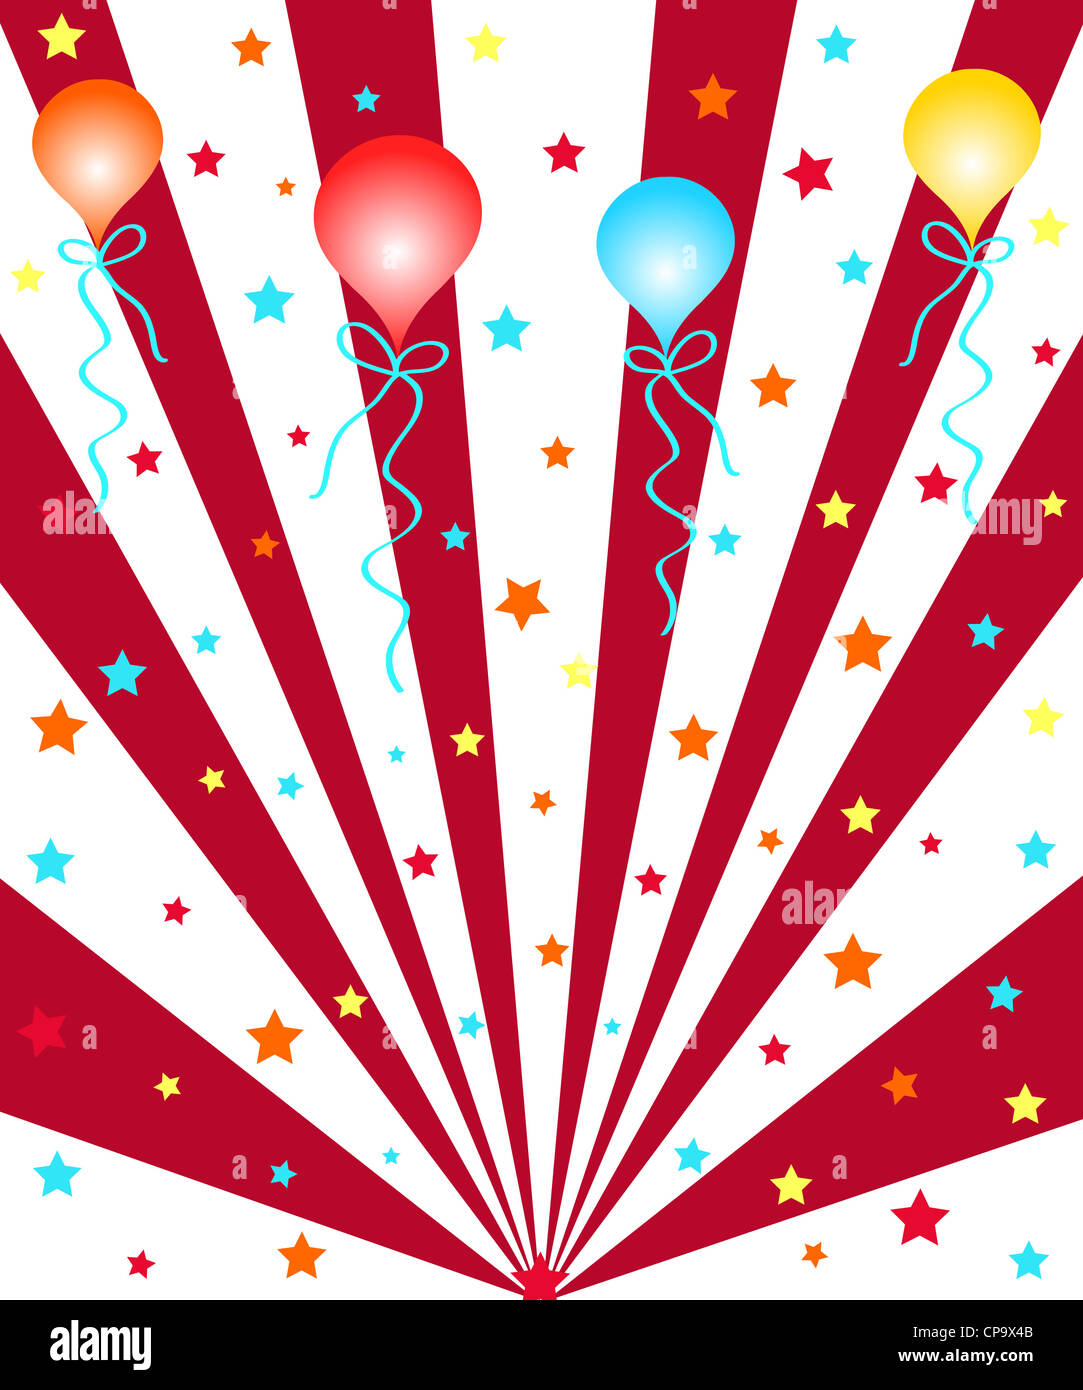 Celebration balloons and stars with red rays Stock Photo